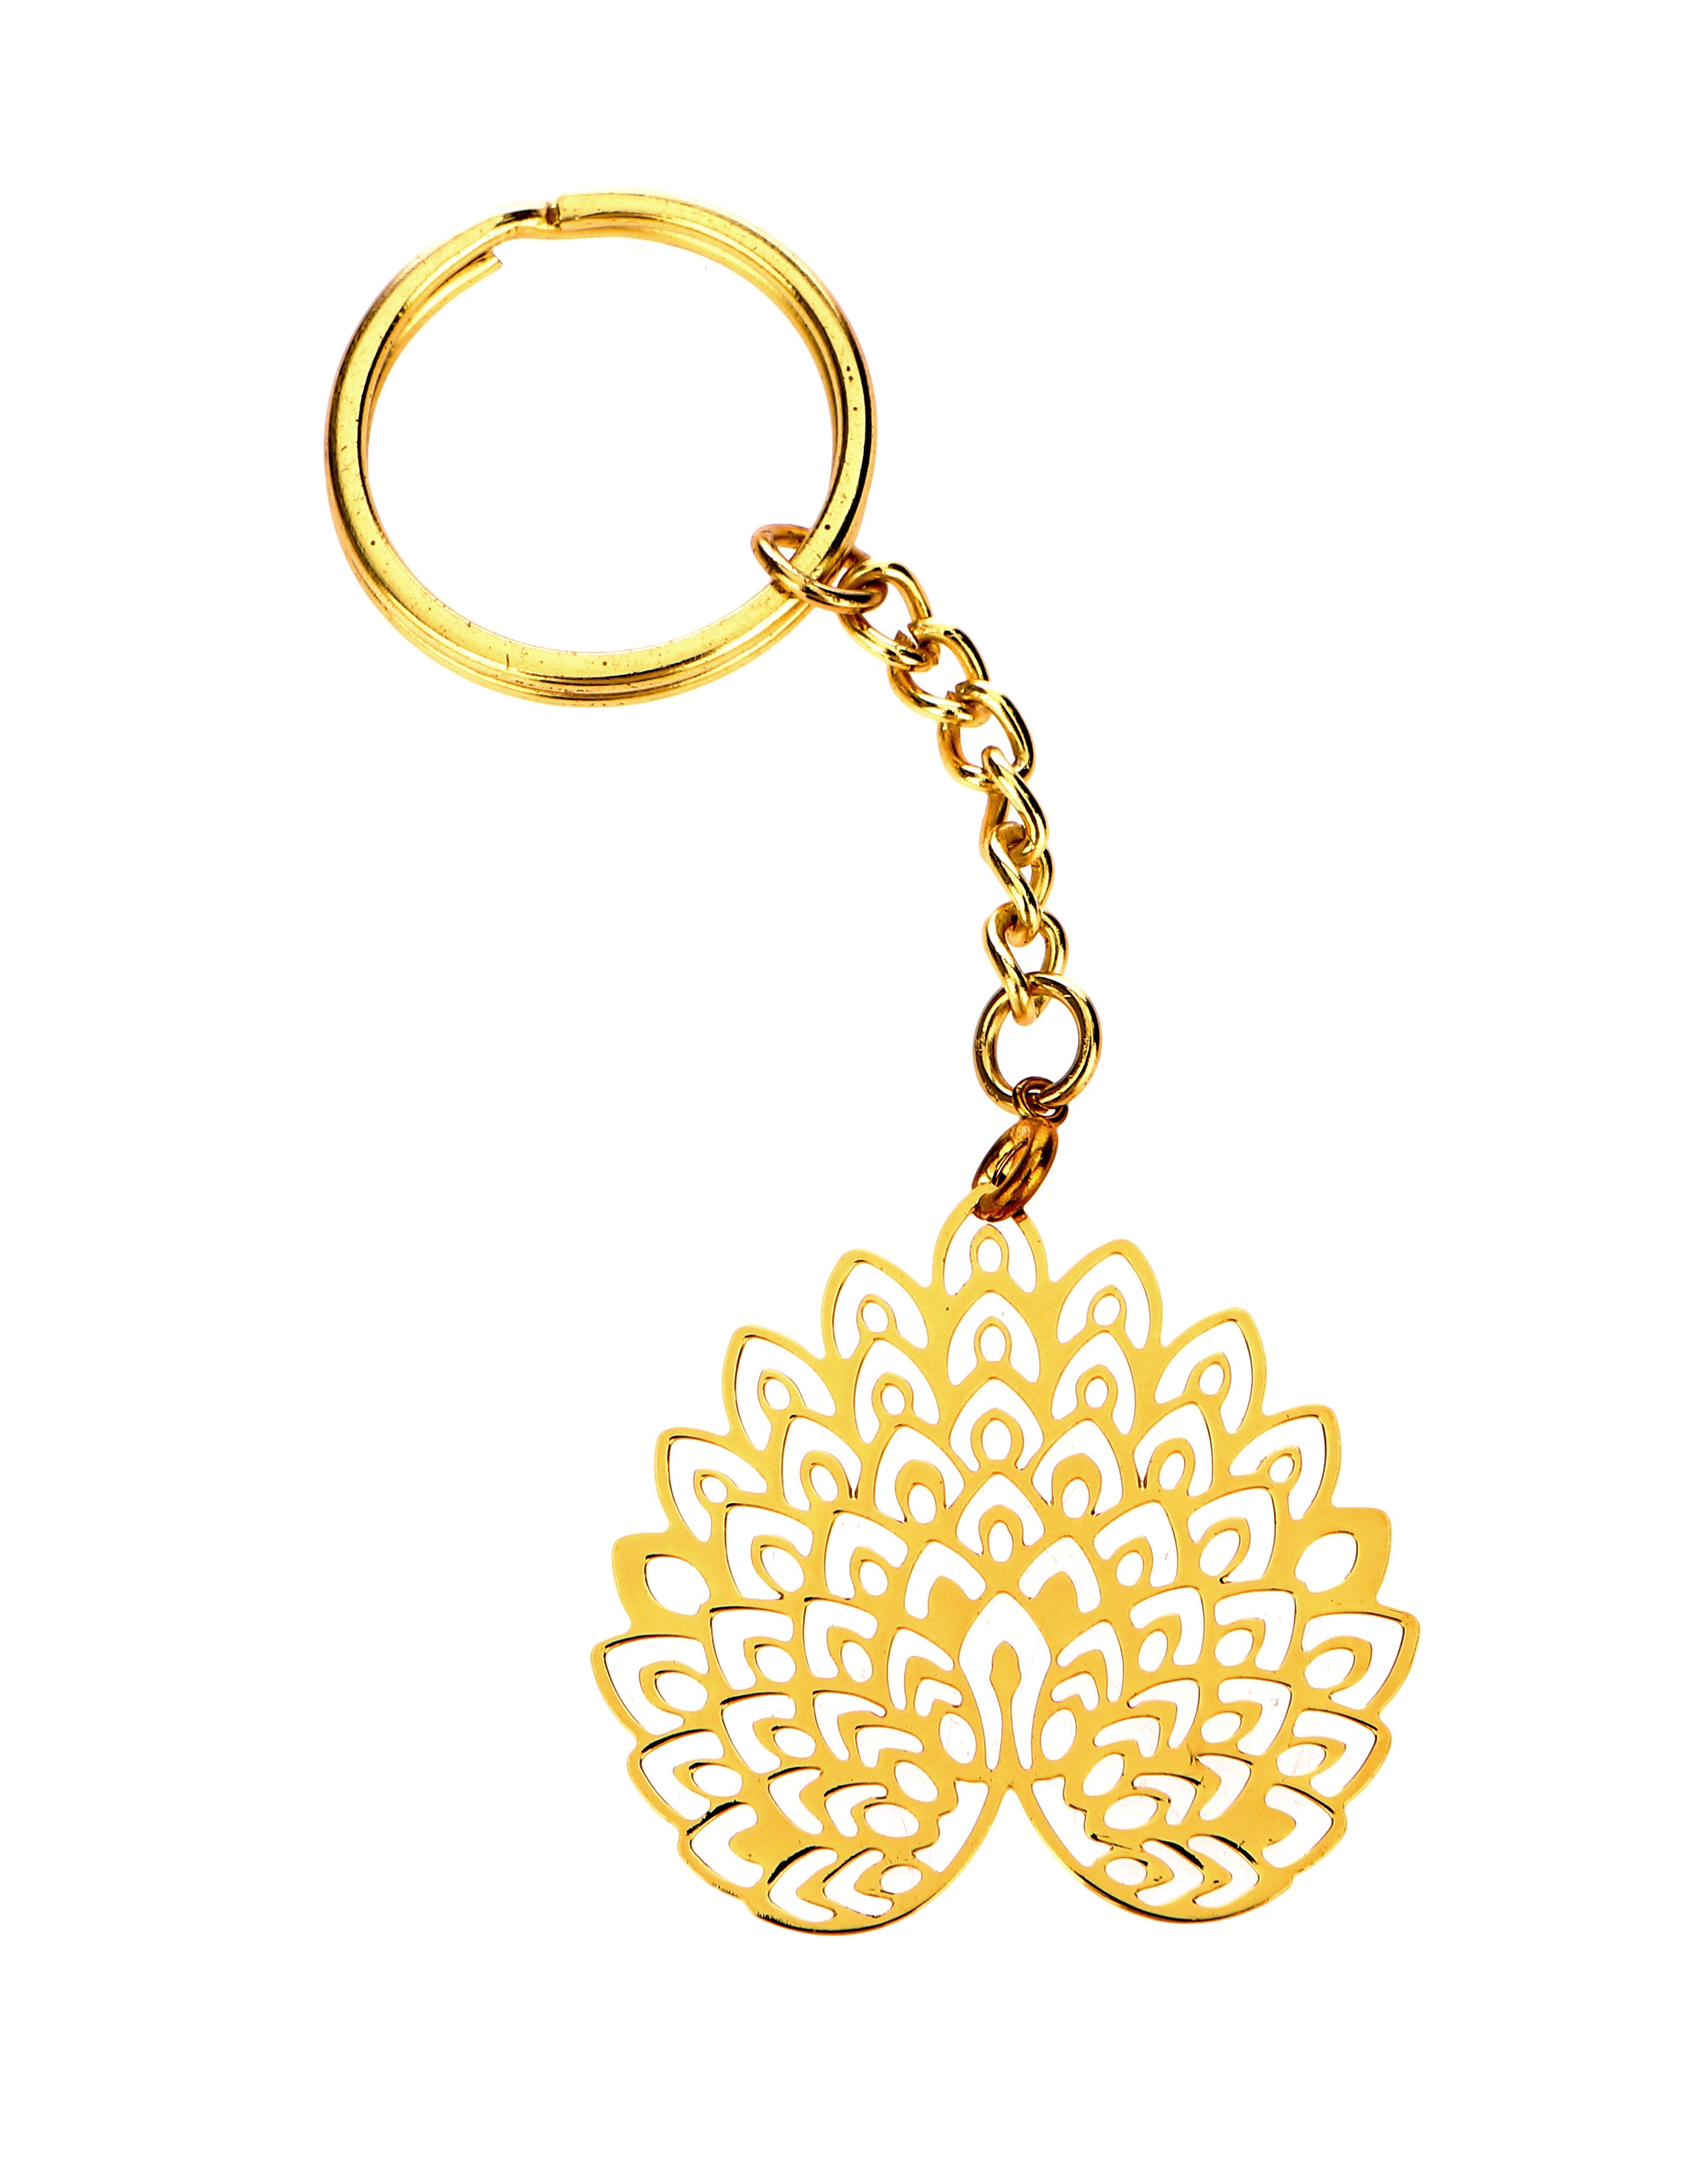 Adoraa's Peacock Brass Key Chain Ring in Golden Finish